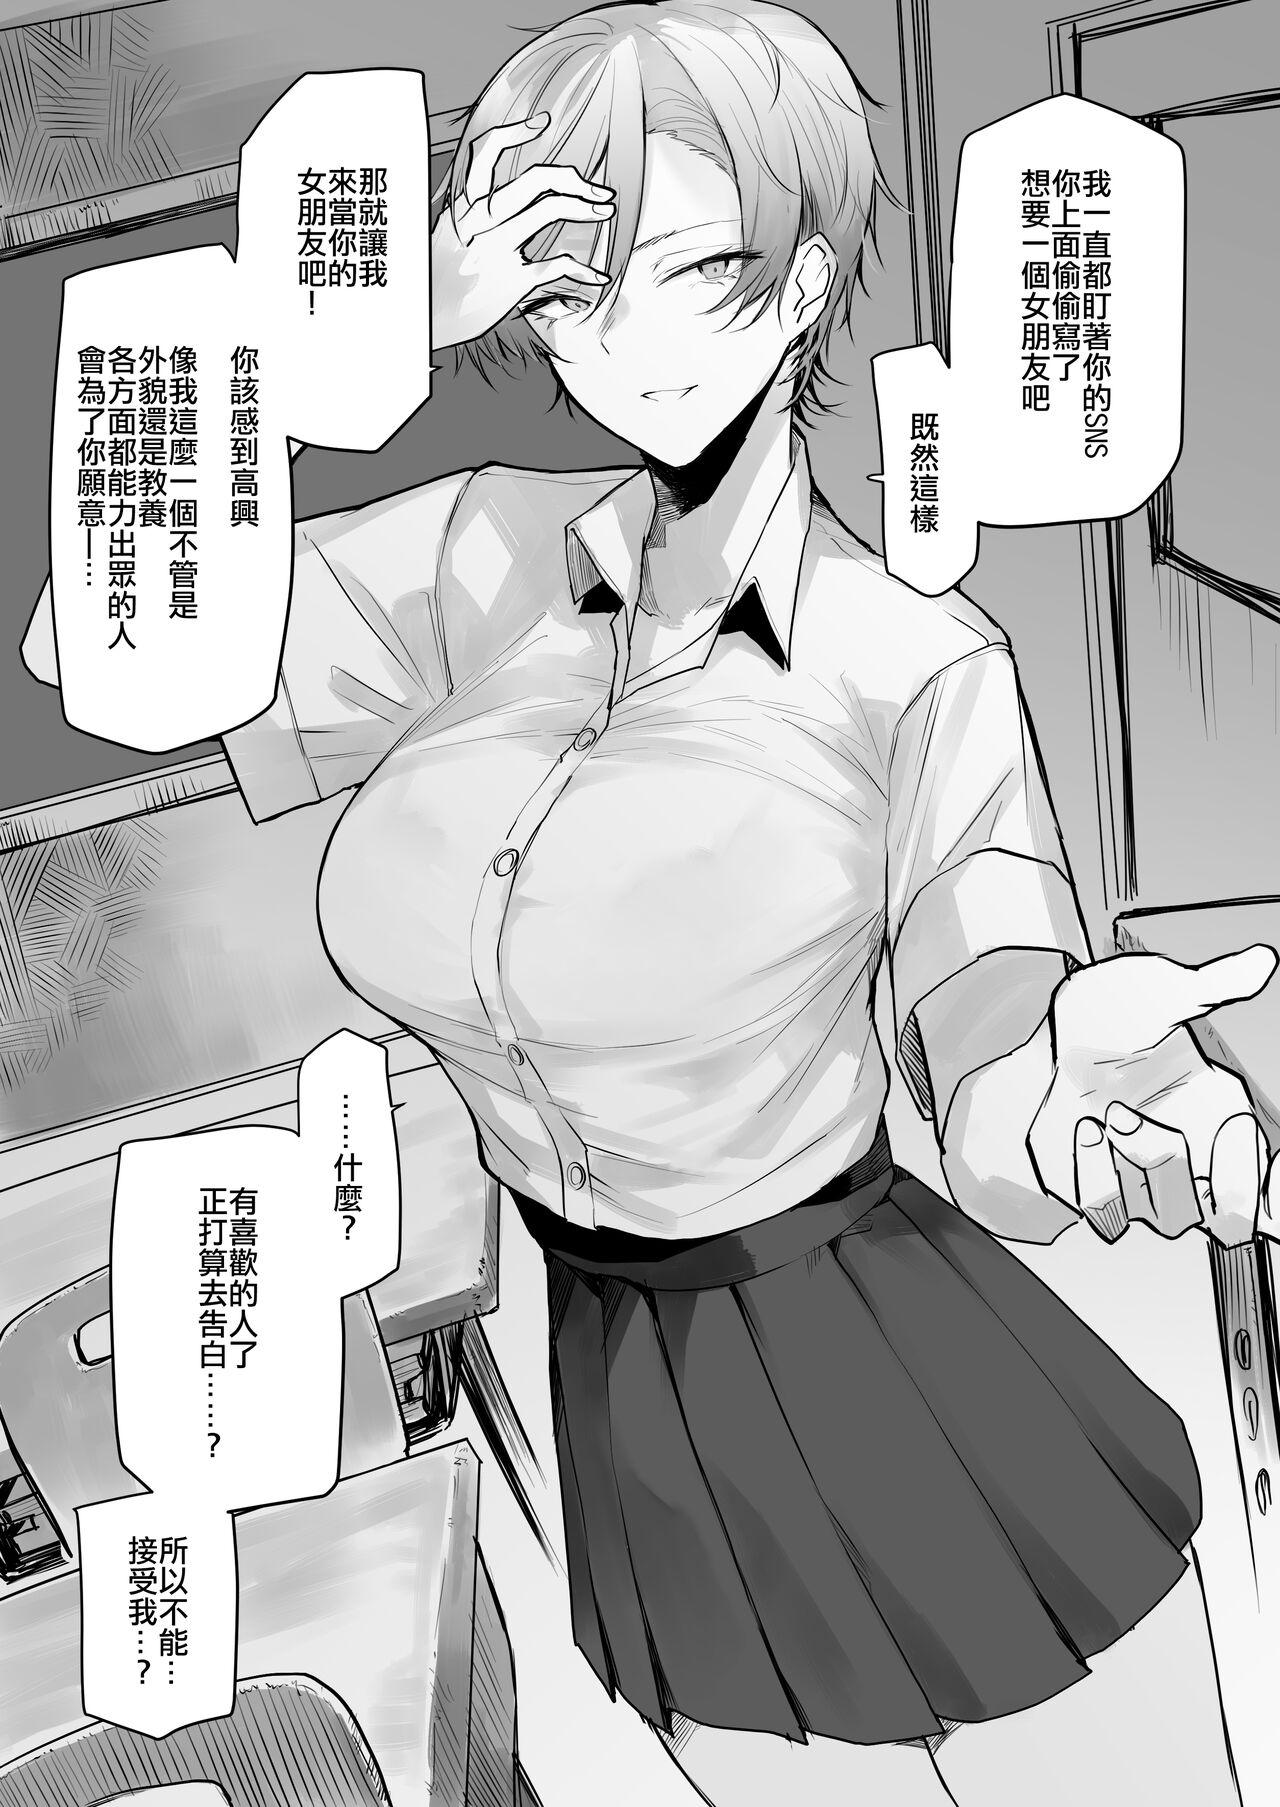 Flaquita A Manga About An Arrogant, Handsome Onee-San（Chinese） Woman Fucking - Page 3